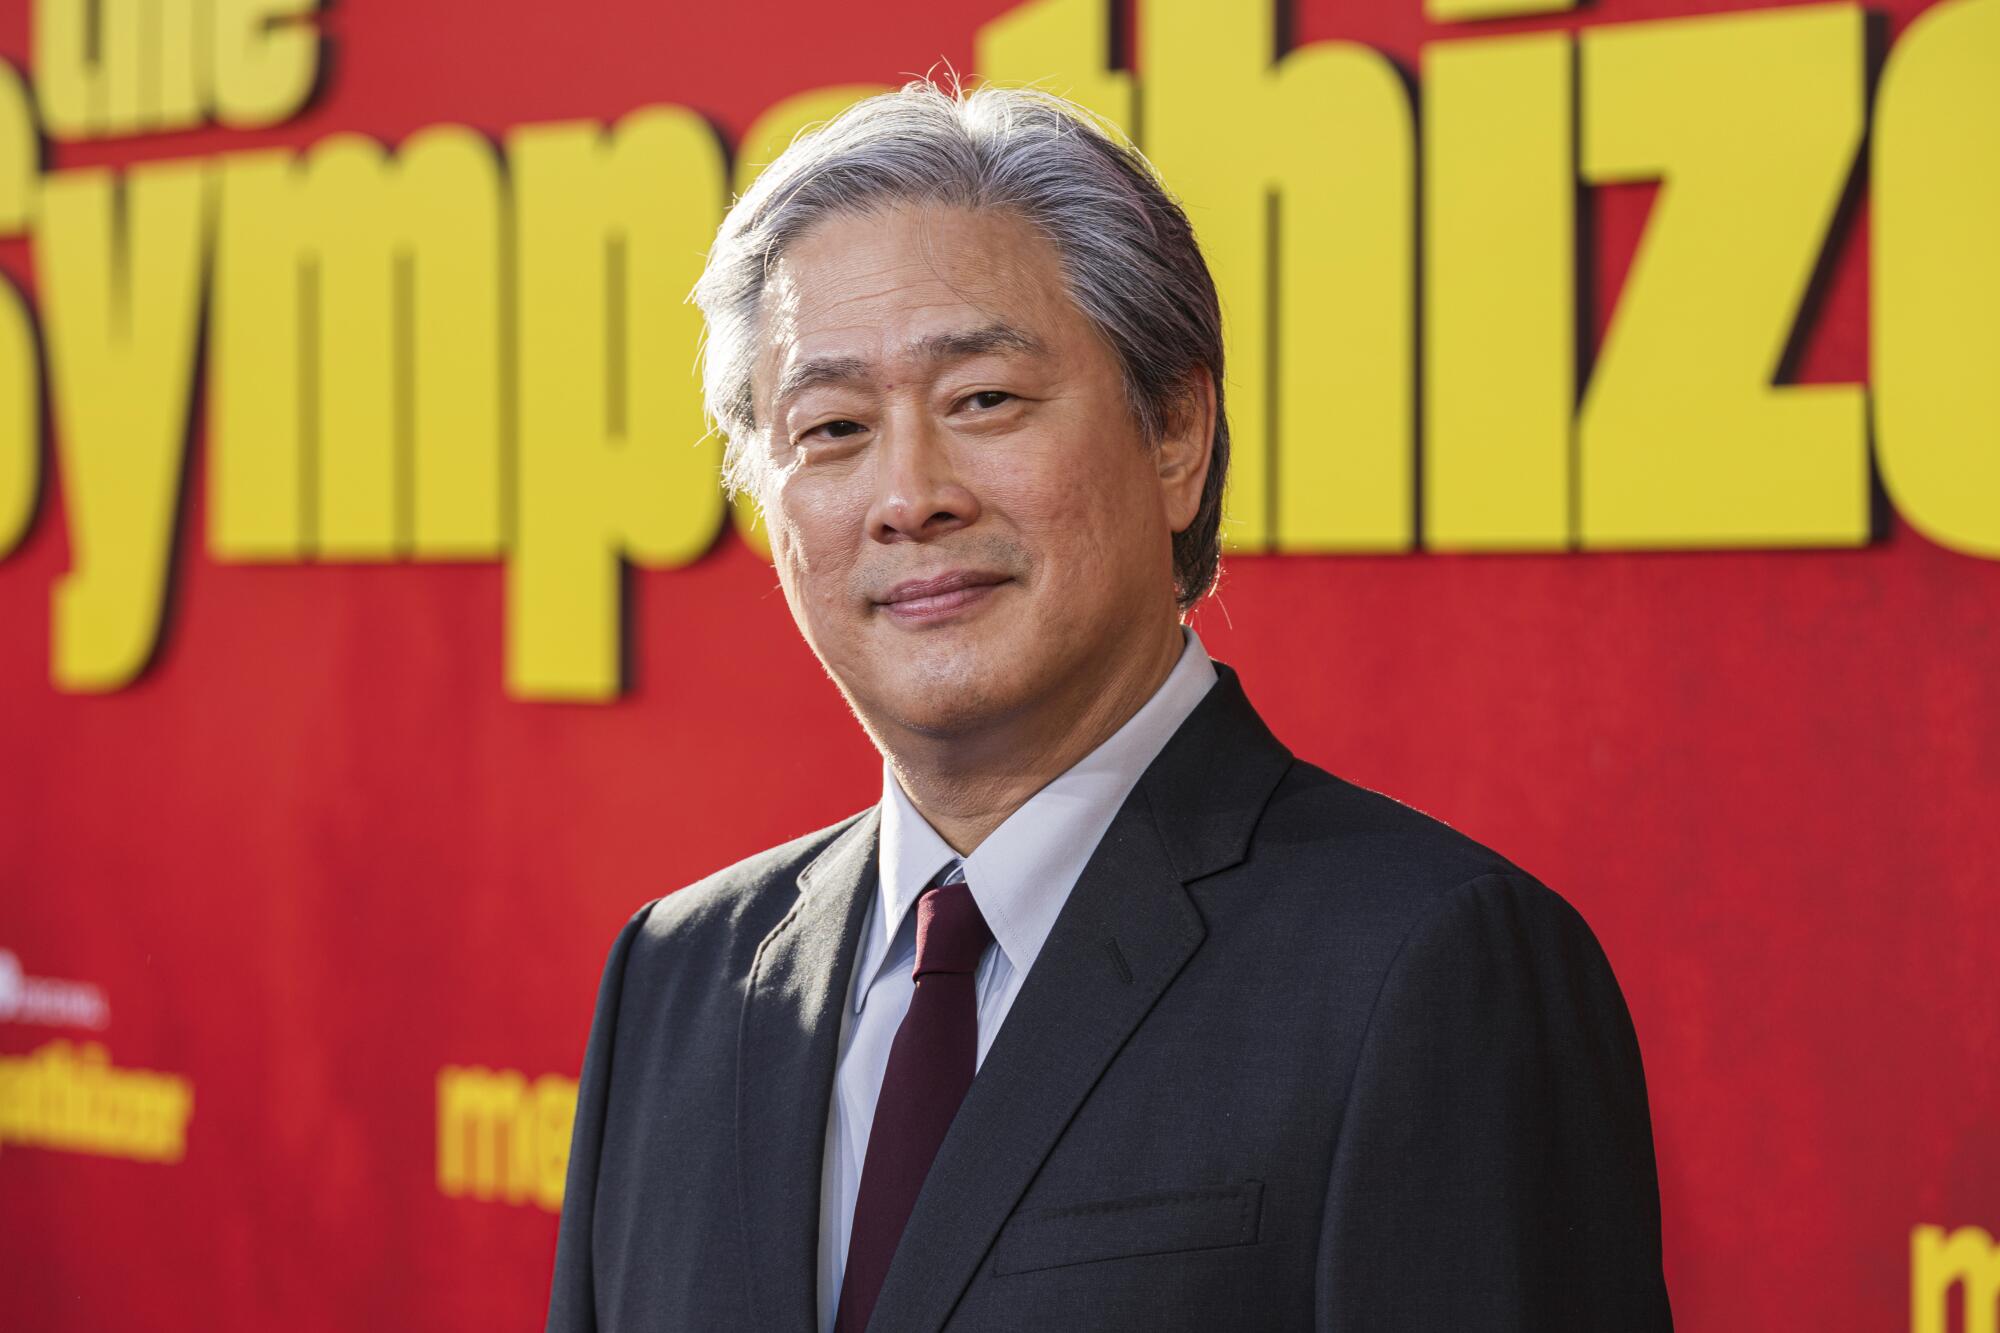 Park Chan-wook stand in front of a red backdrop with "The Sympathizer" logo on it.